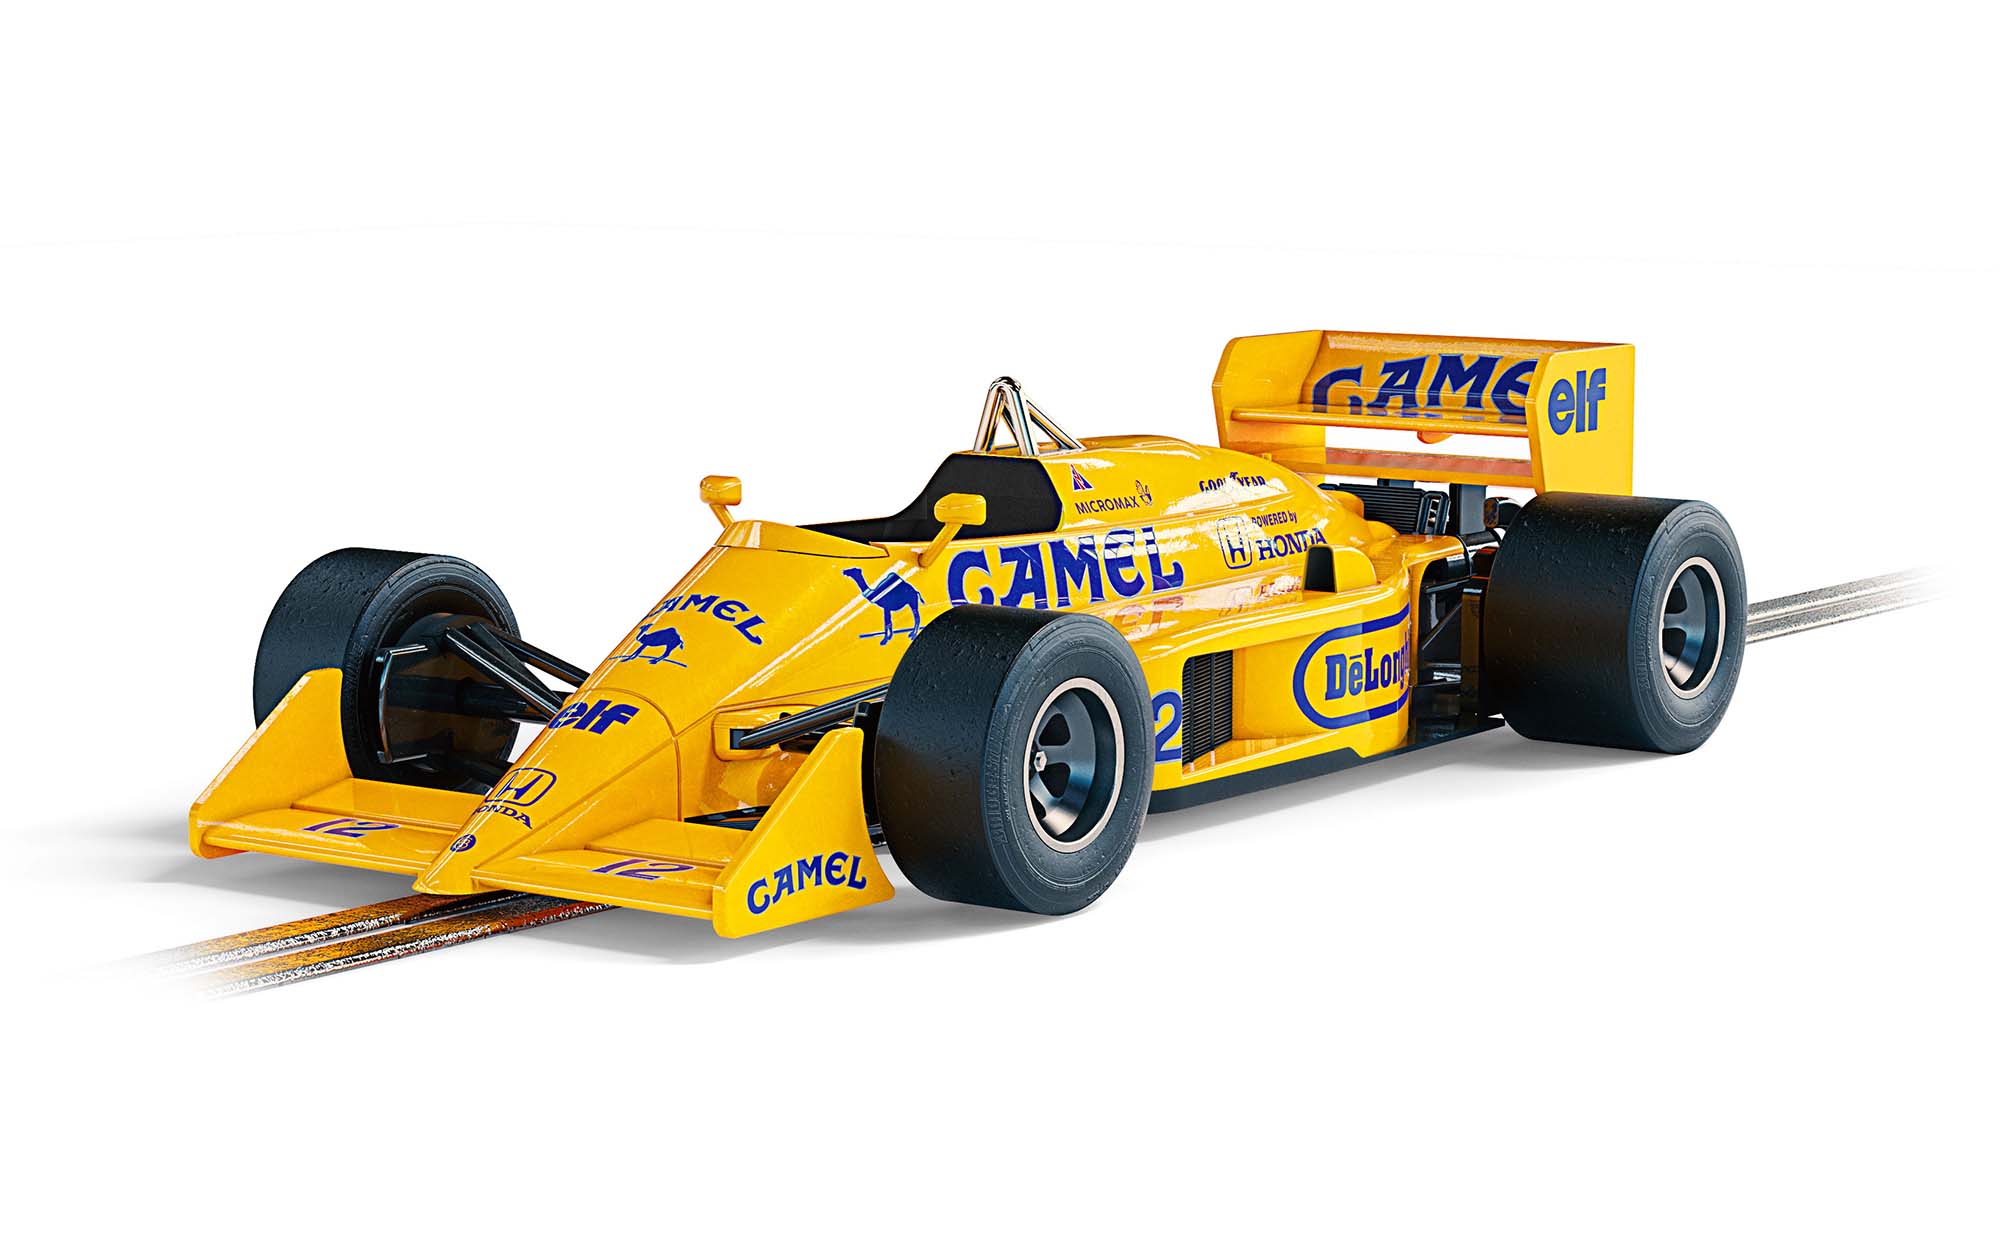 LOTUS 99T CAMEL 1987 Senna water slide DECALS 1:43  F1 Car Auto Collection 